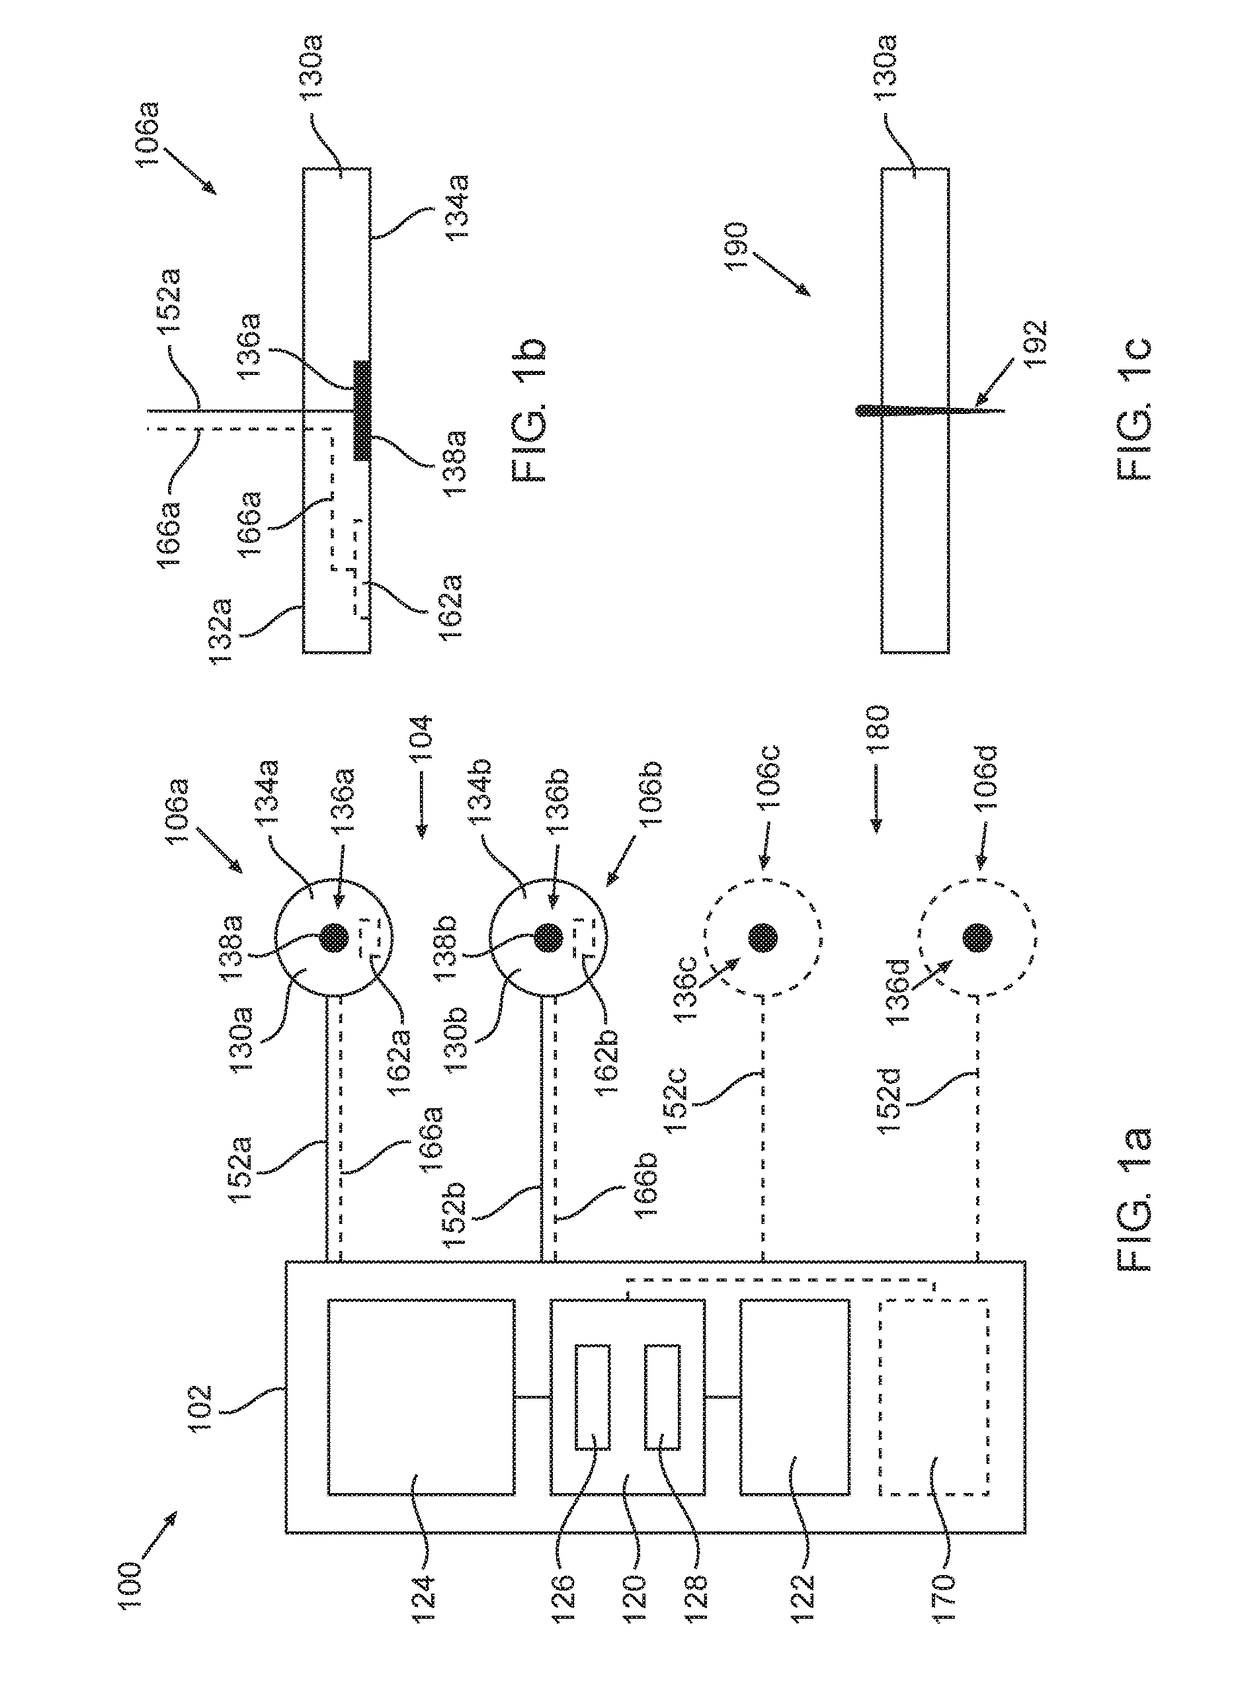 Systems and methods for improving heart-rate variability